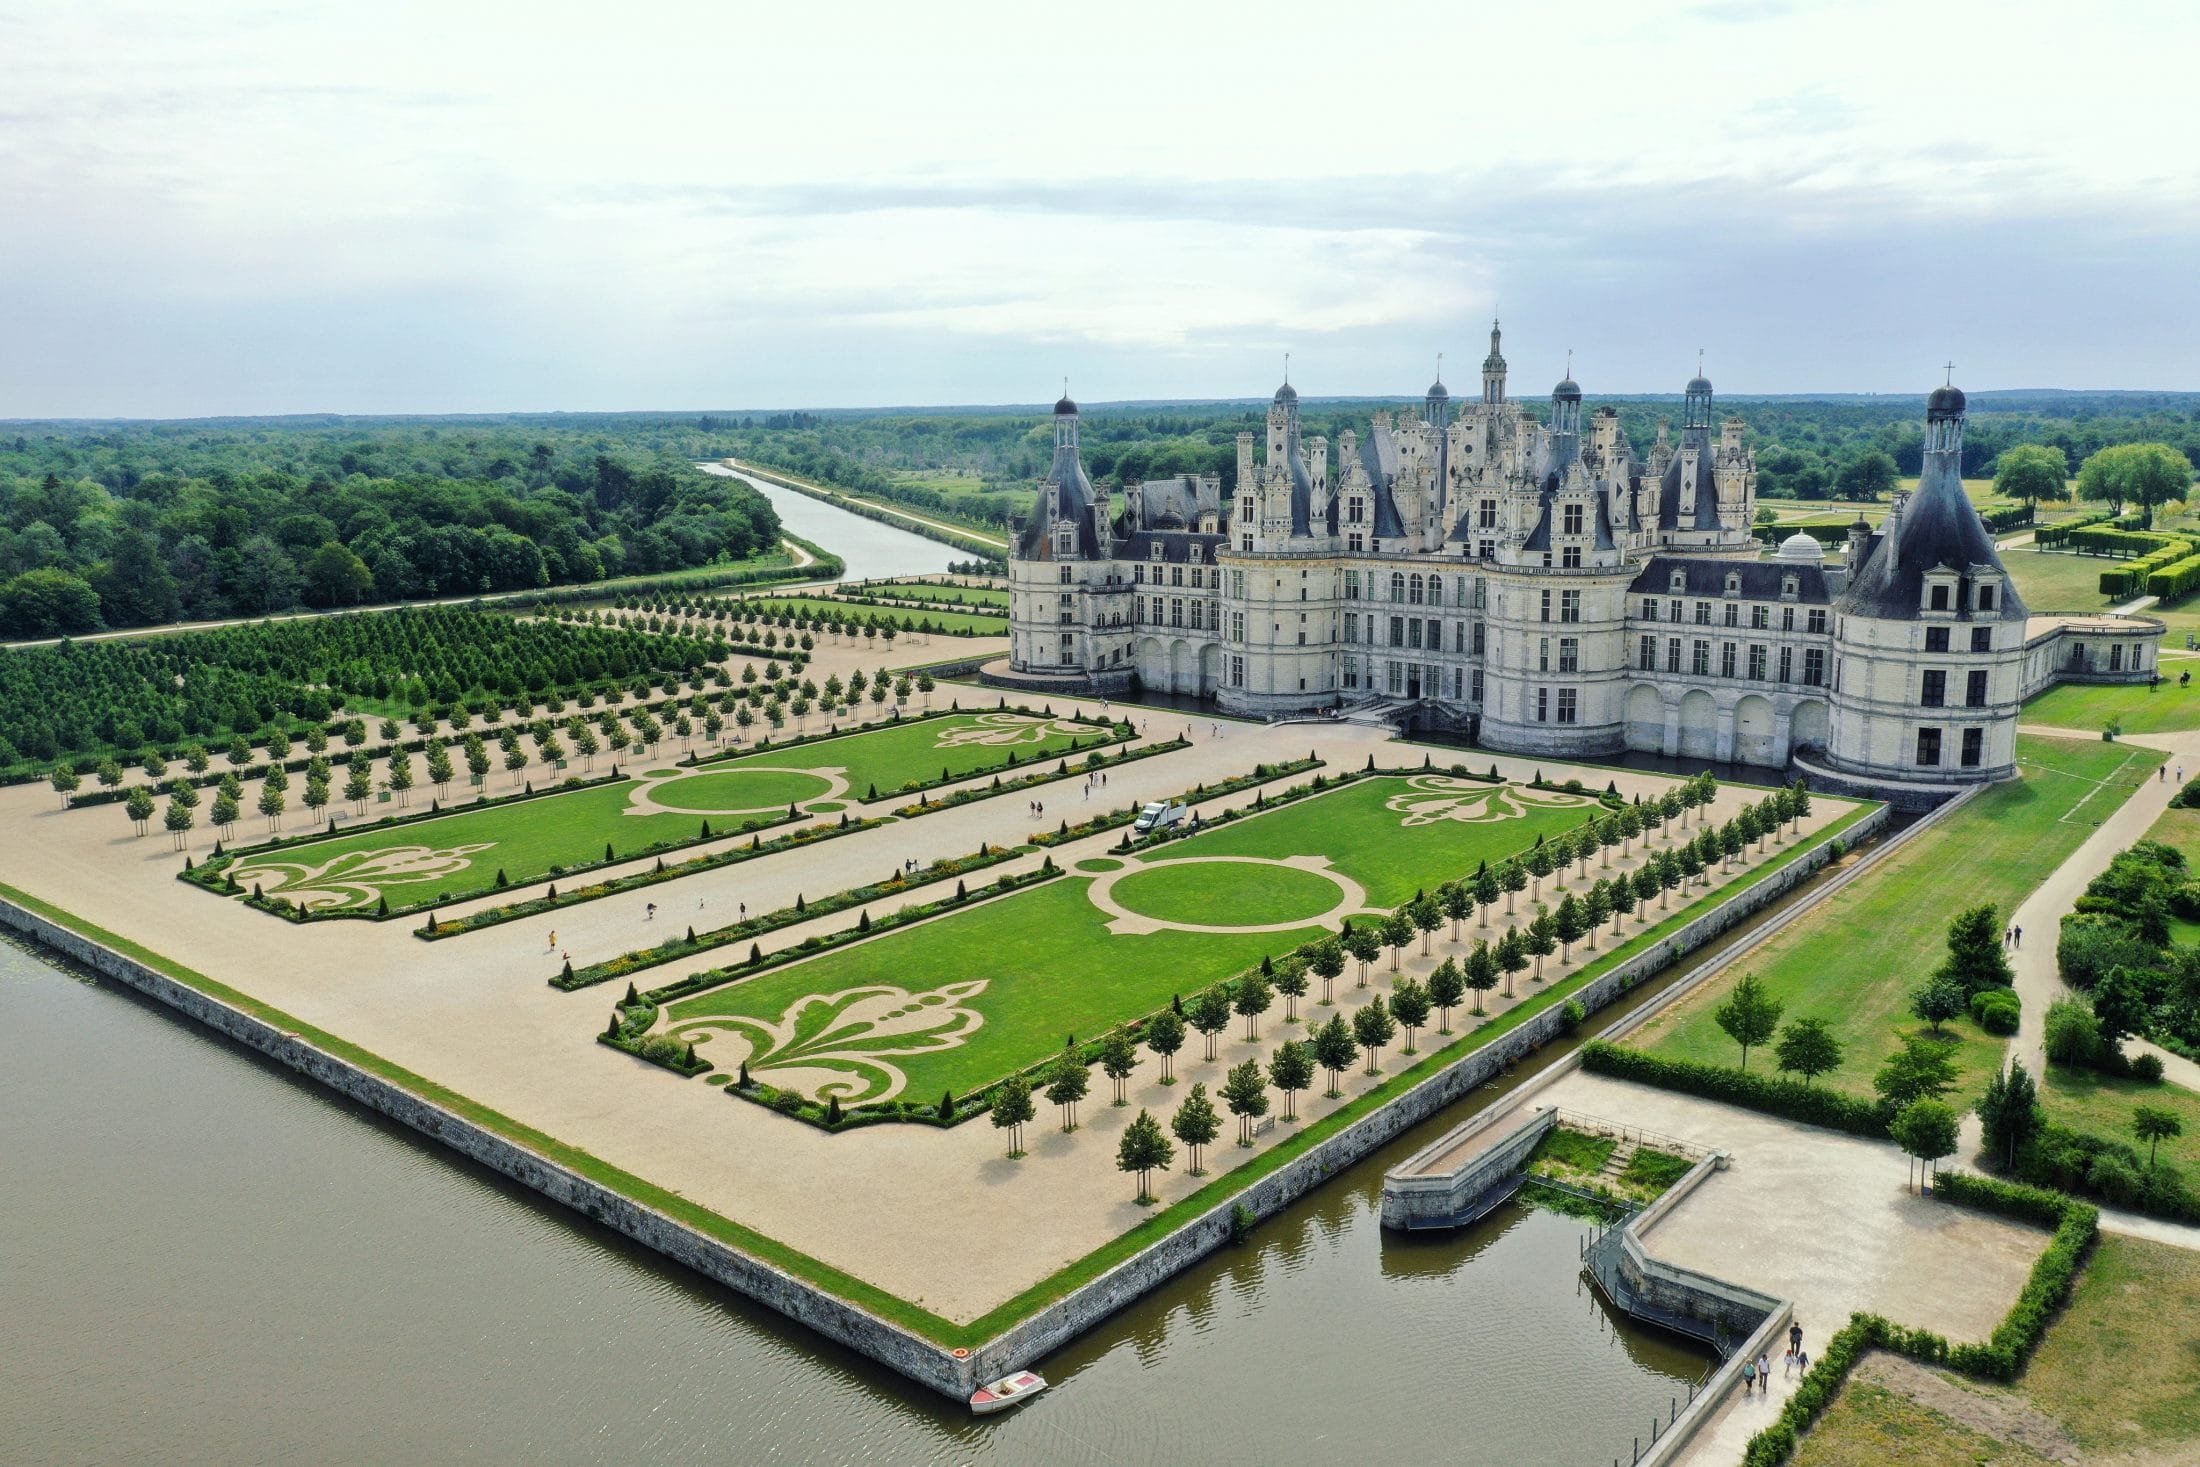 Visiting The Chateau Chambord Castle